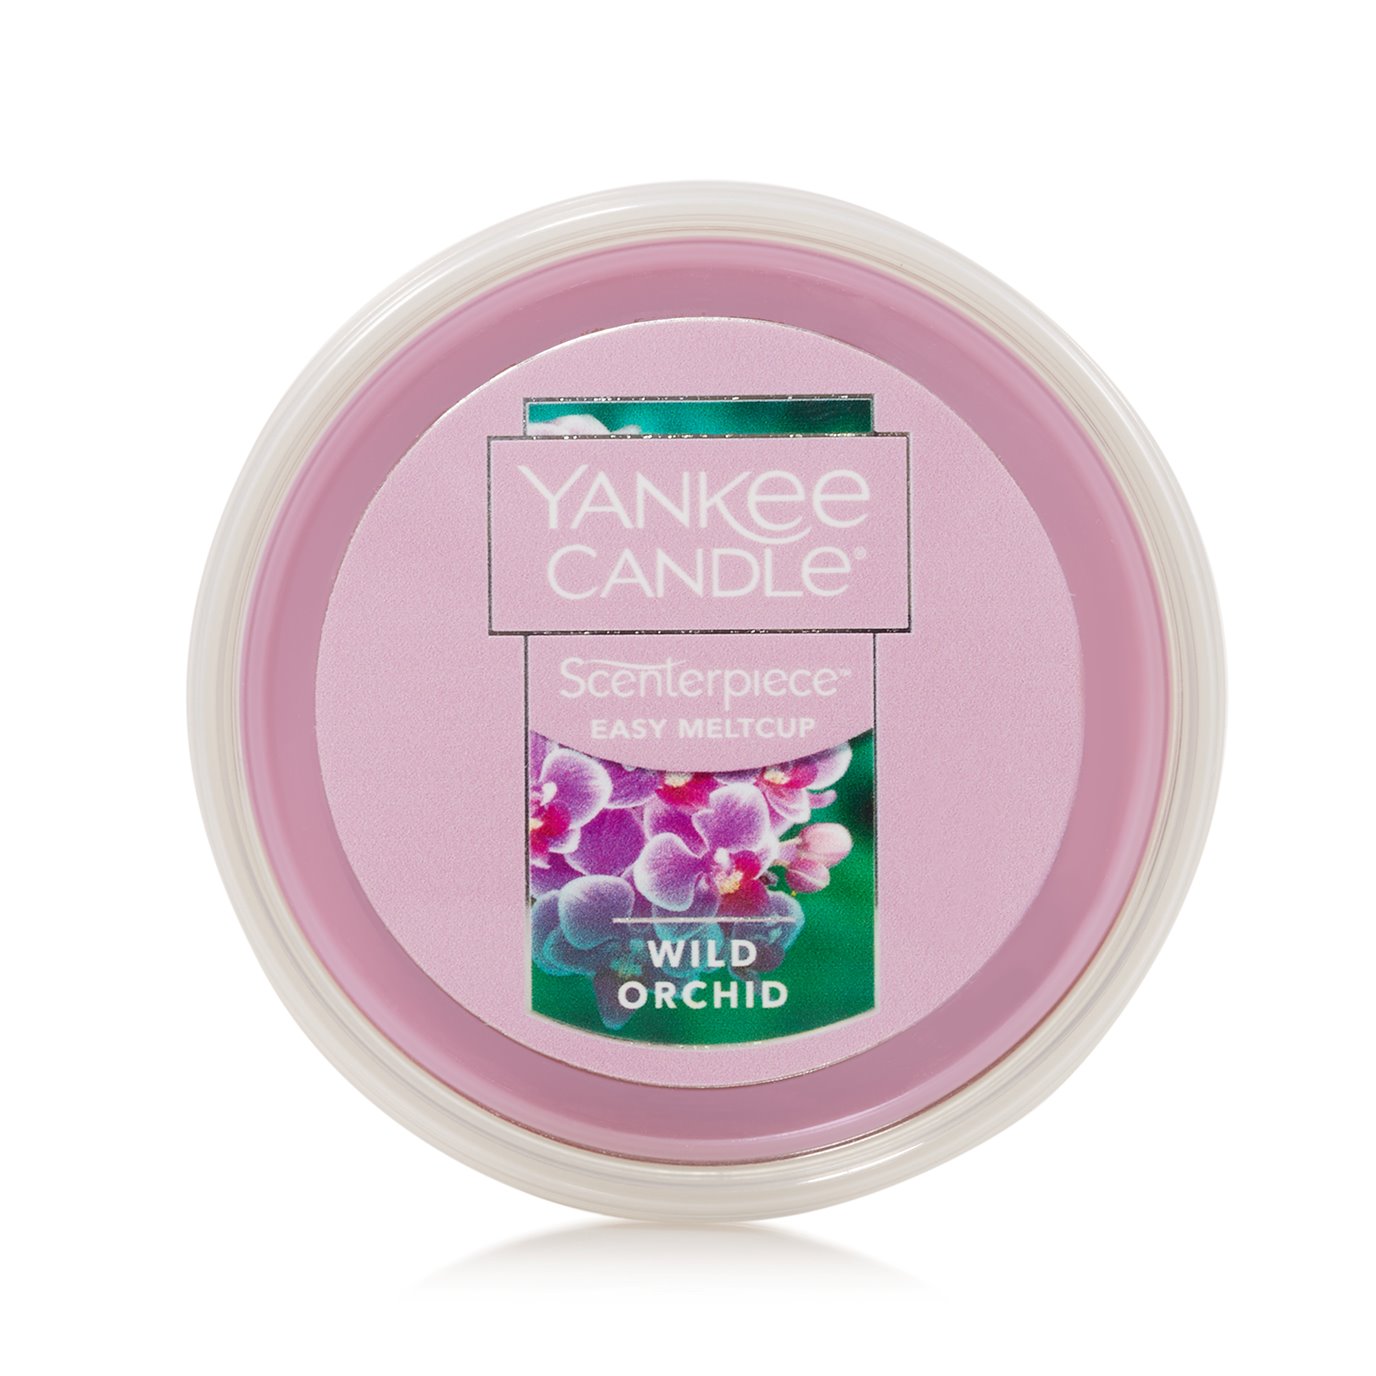 Yankee Candle Wild Orchid Scenterpiece Easy Melt Cup